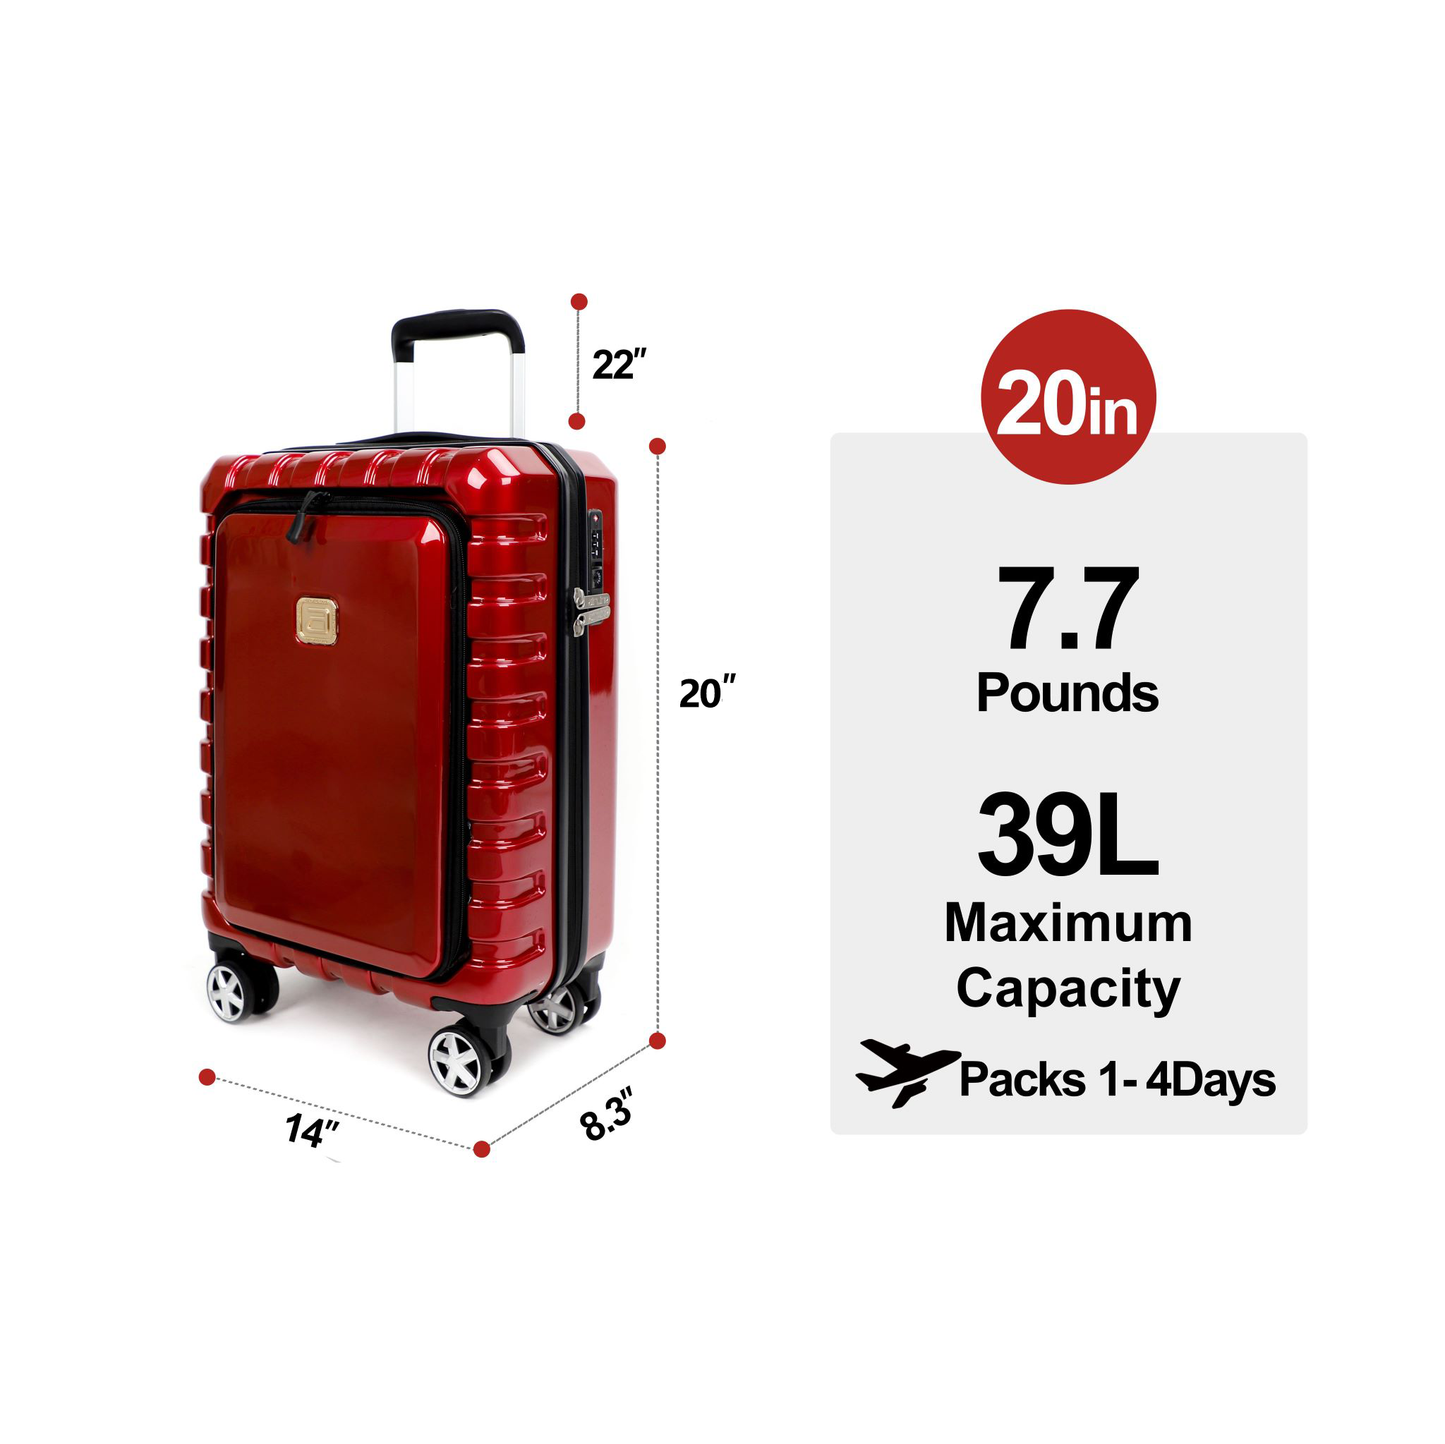 Airline_Carry_On_Luggage_Red_Size_T1978155002